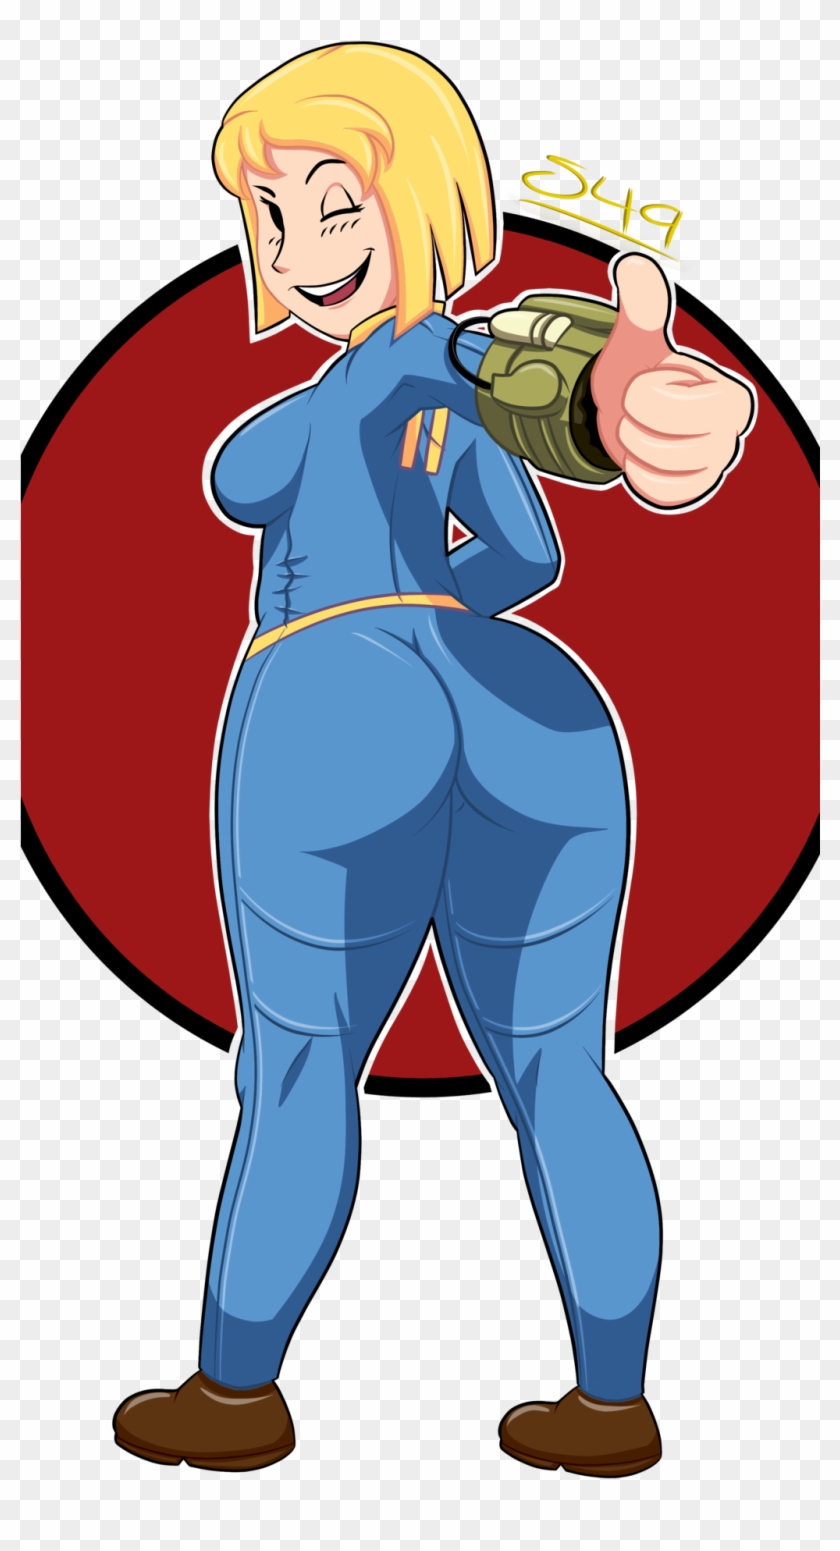 Fallout Clipart Thumbs Up - Vault Girl Thumbs Up #1244431